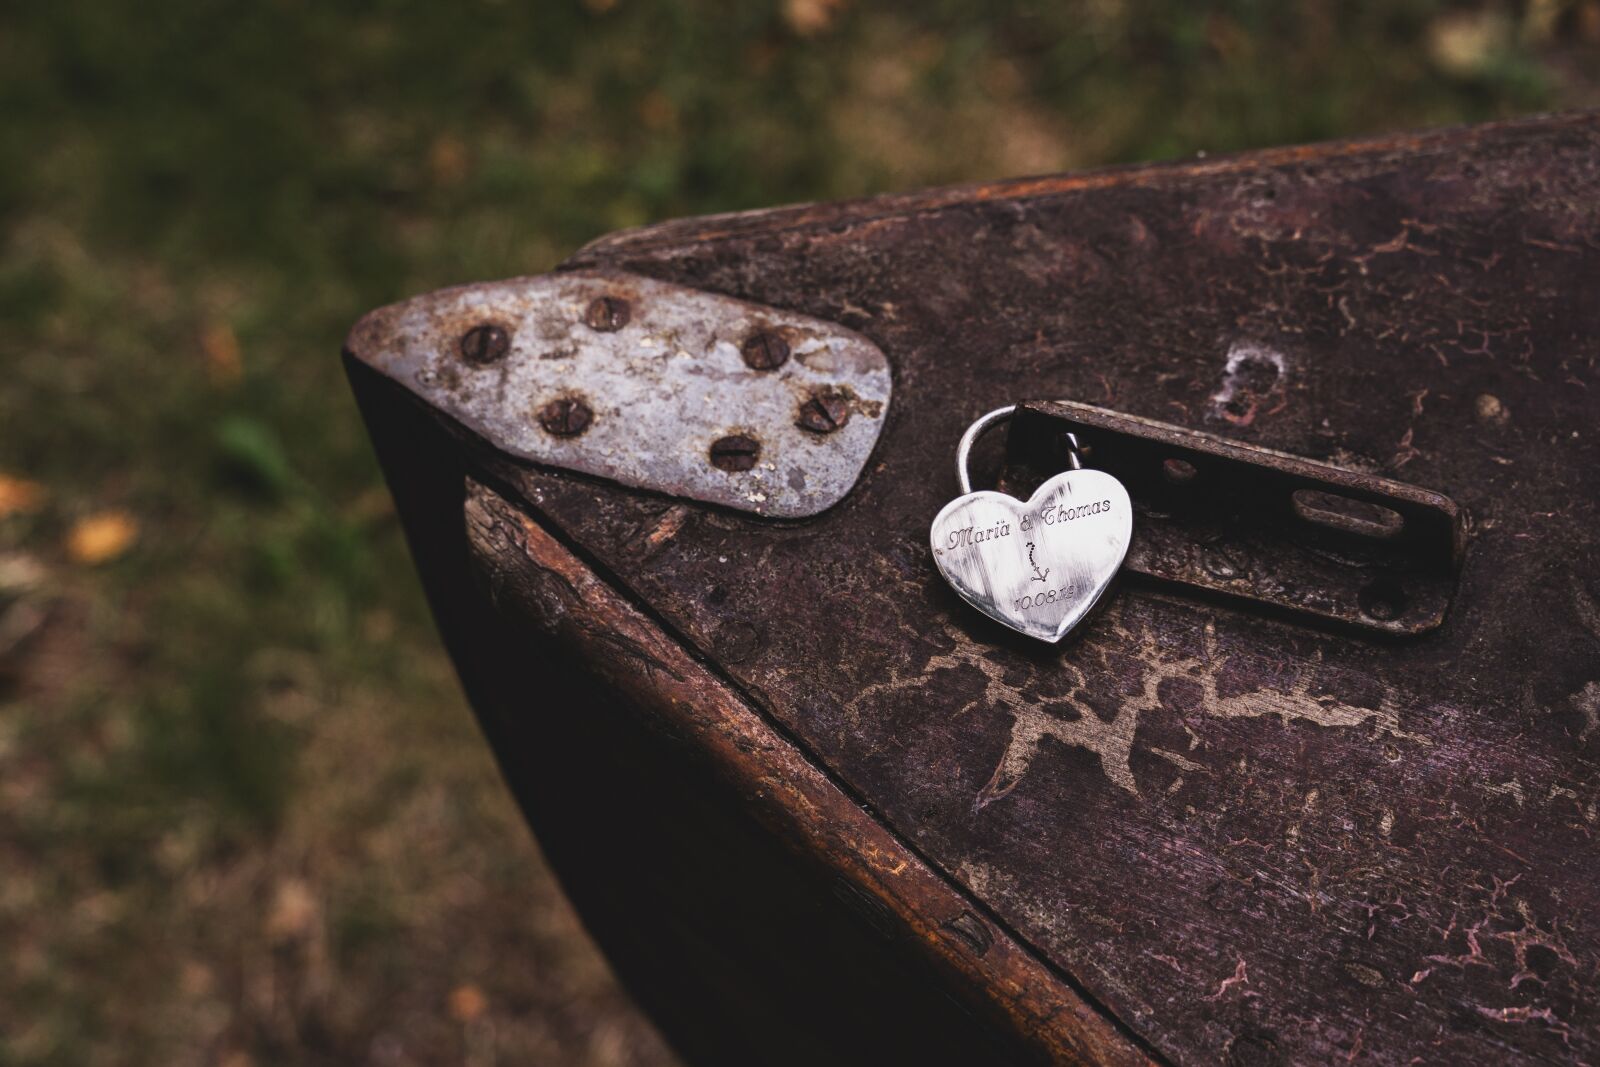 Sony a7 II sample photo. Heart, boat, old photography